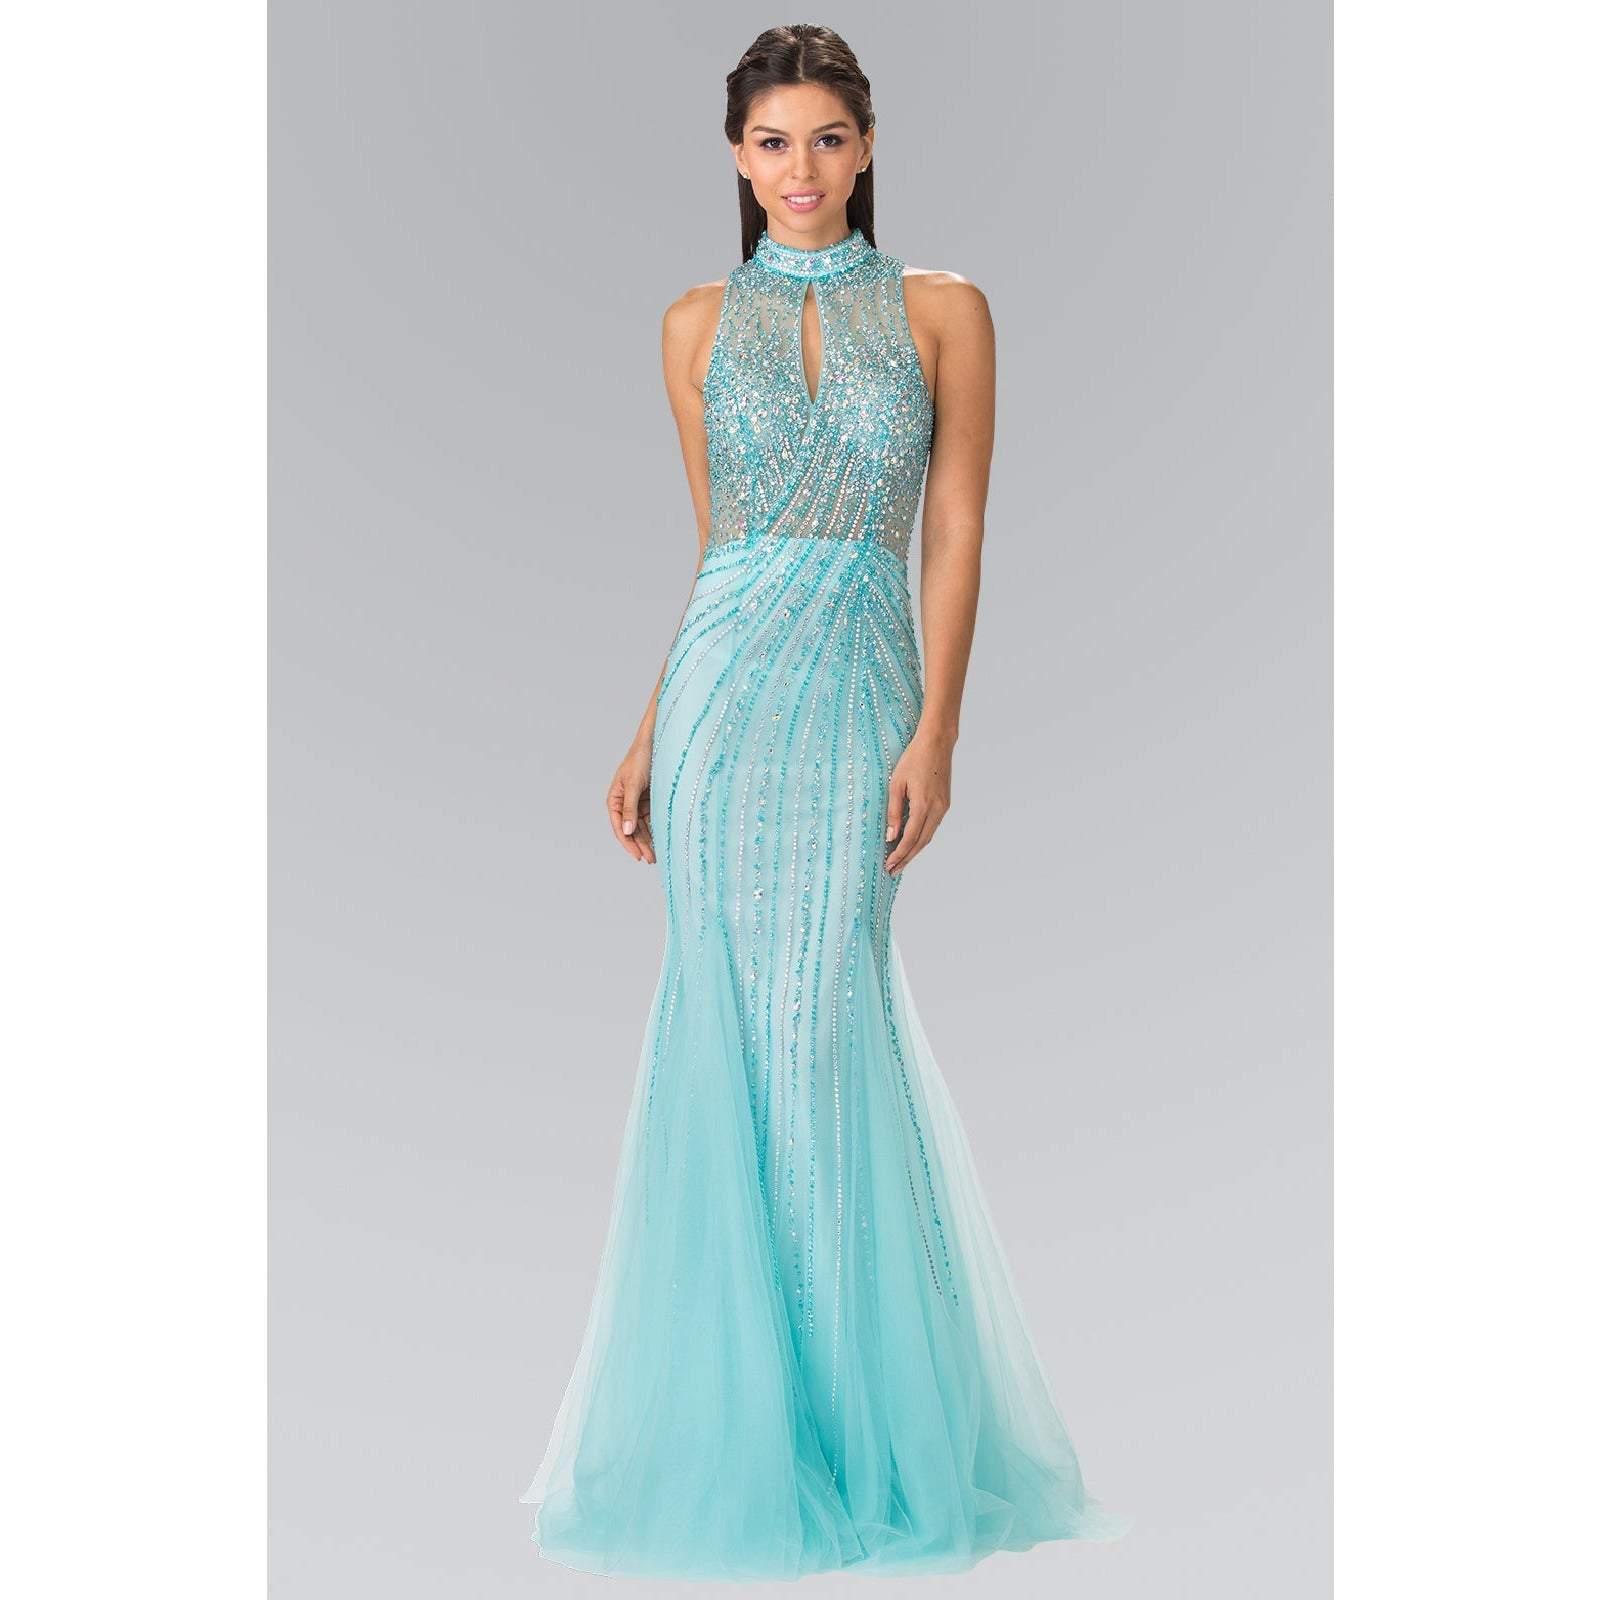 Dress Full Beaded Halter Neck Illusion Top Dress with Open Back GLGL2330 - KME means the very best